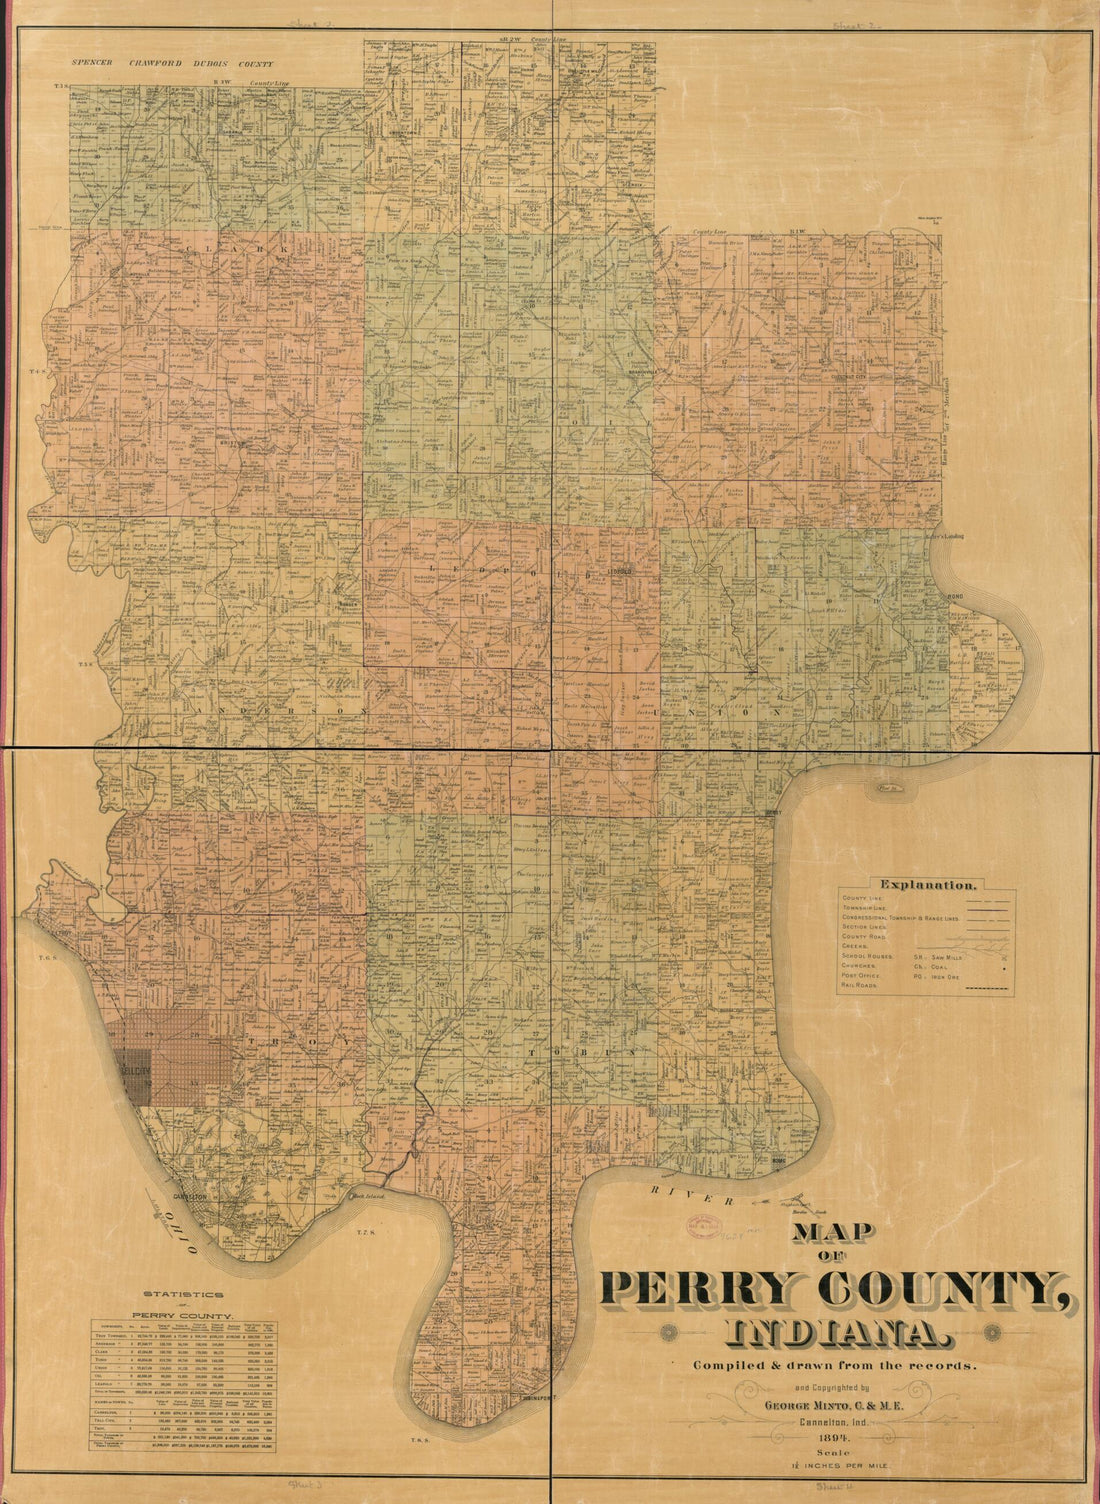 This old map of Map of Perry County, Indiana from 1894 was created by George Minto in 1894